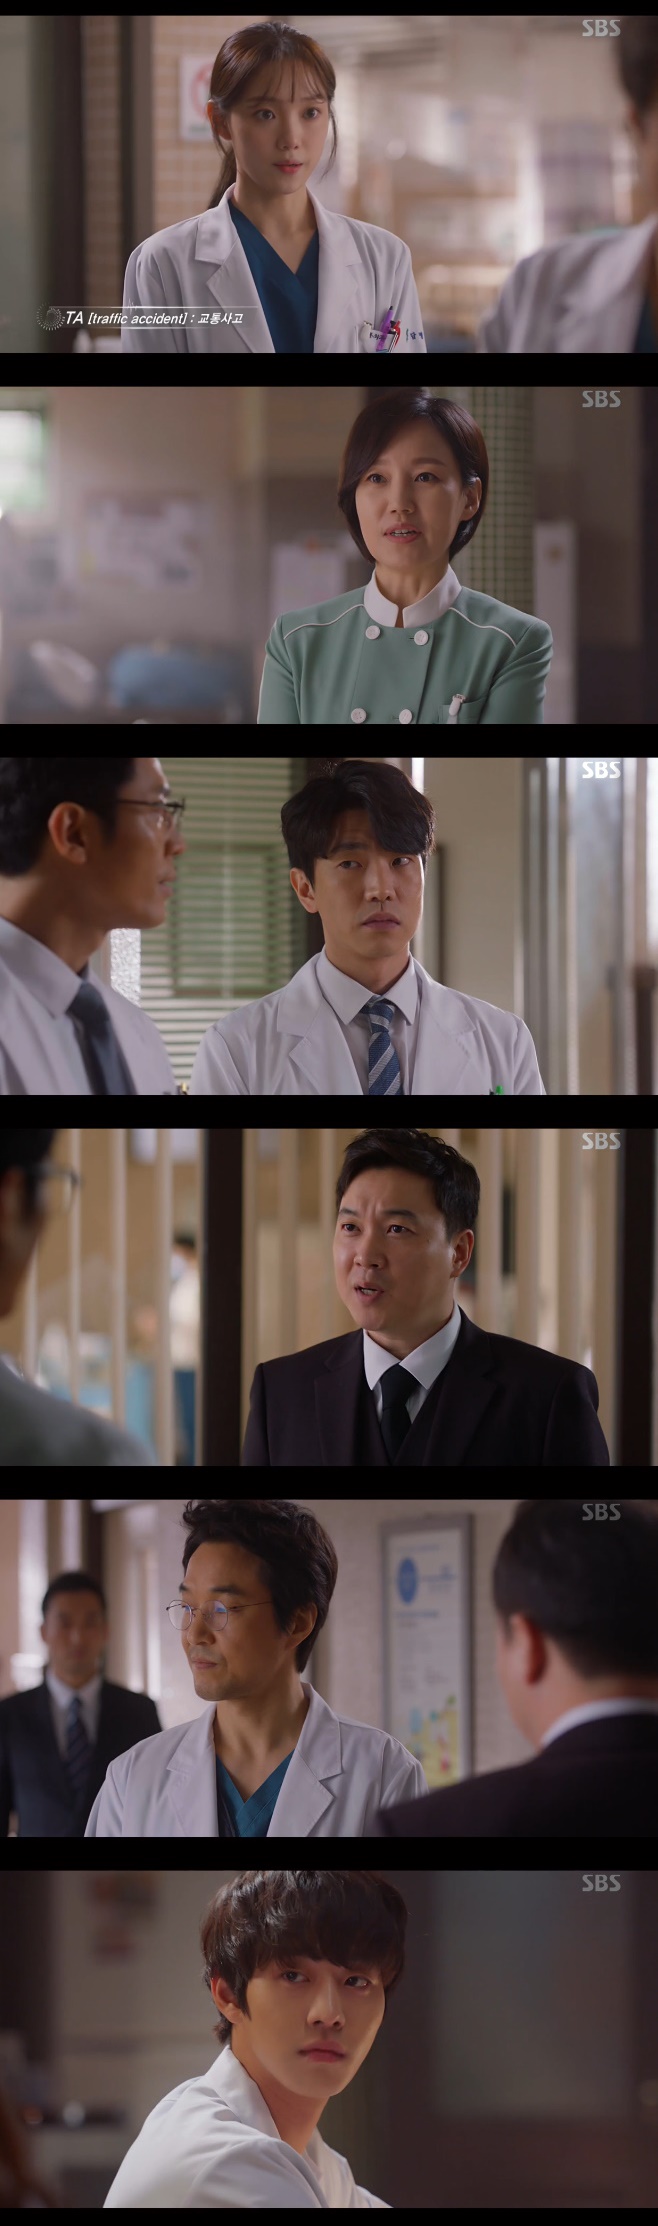 As the romantic doctors Kim Sabu 2 Lee Sung-kyung and Ahn Hyo-seop were recognized by Han Suk-kyu, they suggested that the new family would stay at Doldam Hospital for a long time.In SBSs drama Romantic Doctor Kim Sabu 2 (playplayplay by Kang Eun-kyung and director Yoo In-sik), which aired on the 14th, the stories of people at Doldam Hospital were drawn.On the same day, Seo Woo Jin (Ahn Hyo-seop) entered the operating room as a staff member of the ministerial surgery conducted by Park Min-guk (Kim Joo-heon) of the Geosan University Hospital.Earlier, Han Suk-kyu told Seo Woo Jin to go to the operating room to help Park Min-guk on behalf of the surgery-wound Cha Eun-jae.However, Cha Eun-jae, who did not know this fact, felt betrayed by Seo Woo Jin. In fact, Cha Eun-jae, who had been drugged because of the depression, was asleep all the time in the hospital.In the operating room, Seo Woo Jin told Park Min-guk about various situations at the time of the first operation.Seo Woo Jin said that the patient s condition deteriorated sharply when the situation was urgent and the minister started surgery without taking CT.Park Min-guk asked, How did you catch this without CT? And Seo Woo Jin did not answer.The minister, Son, blamed Kim Sabu, who had not taken CT and went into surgery, saying, If you did not have yourself, you should have sent me to a big hospital.If I was more worried about the title than a patient as a Physician, I would have chosen to die instead of surgery, Kim said.Your fathers condition would have been more comfortable. The minister, Son, declared that he would sue Kim Sabu and Doldam Hospital for medical malpractice.When I heard that Oh Myung-sim (Jin Kyung), Jang Gi-tae (Im Won-hee) and Nam Do-il (Byeon Woo-min) had taken a second surgery video at Geosan University, I met with Seo Woo Jin.Jang Gi-tae asked Seo Woo Jin if he answered the question against Kim Sabu and asked if he received money from the Geoje University.So Seo Woo Jin went to Kim Sabu with arsenic. Seo Woo Jin, who misunderstood Kim Sabu, said, If you ask me questions, why not ask them yourself?Did you test it to see how I was doing in the operating room? Kim was embarrassed.Since then, Kim has found Cha Eun-jae, who copes with emergency patients in the emergency room.After the crisis, Kim mentioned the story he had seen in the emergency room of the Geosan University Hospital and asked, Why was there at that time? Cha said, I was mainly in the emergency room when I was on duty.I dont know if I ever ran out of the emergency room, Cha said. Its all right if its not just the operating room.Kim ordered the patient to receive the first patient of Cha Eun-jae, and impressed Cha Eun-jae.Im sorry as an adult, but Im not pushing you like that without evidence, he said, when he visited Seo Woo Jin and apologized.If he was such a person, he would chase the money, he would not have found the answer. Meanwhile, Minister Son asked Park Min-guk for a copy of the second surgery recording.When asked if the testimony related to the first surgery would be in the video, Park Min-guk and Yang Ho-joon said that there is no video about their fault.At that time, Cha Eun-jae asked Yang Ho-joon, Is this USB right? And found out that there was an operation video in USB.The video showed a more disadvantageous situation on the side of the hospital at Geosan University, and the minister, who learned the fact, visited Kim Sabu and apologized.Kim, who confirmed the second copy of the operation, paid the first ten million won that Seo Woo Jin had requested. How many months of prepayment? Kim said to Seo Woo Jin, My money.Youre going to have to pay me a million won a month, he said.